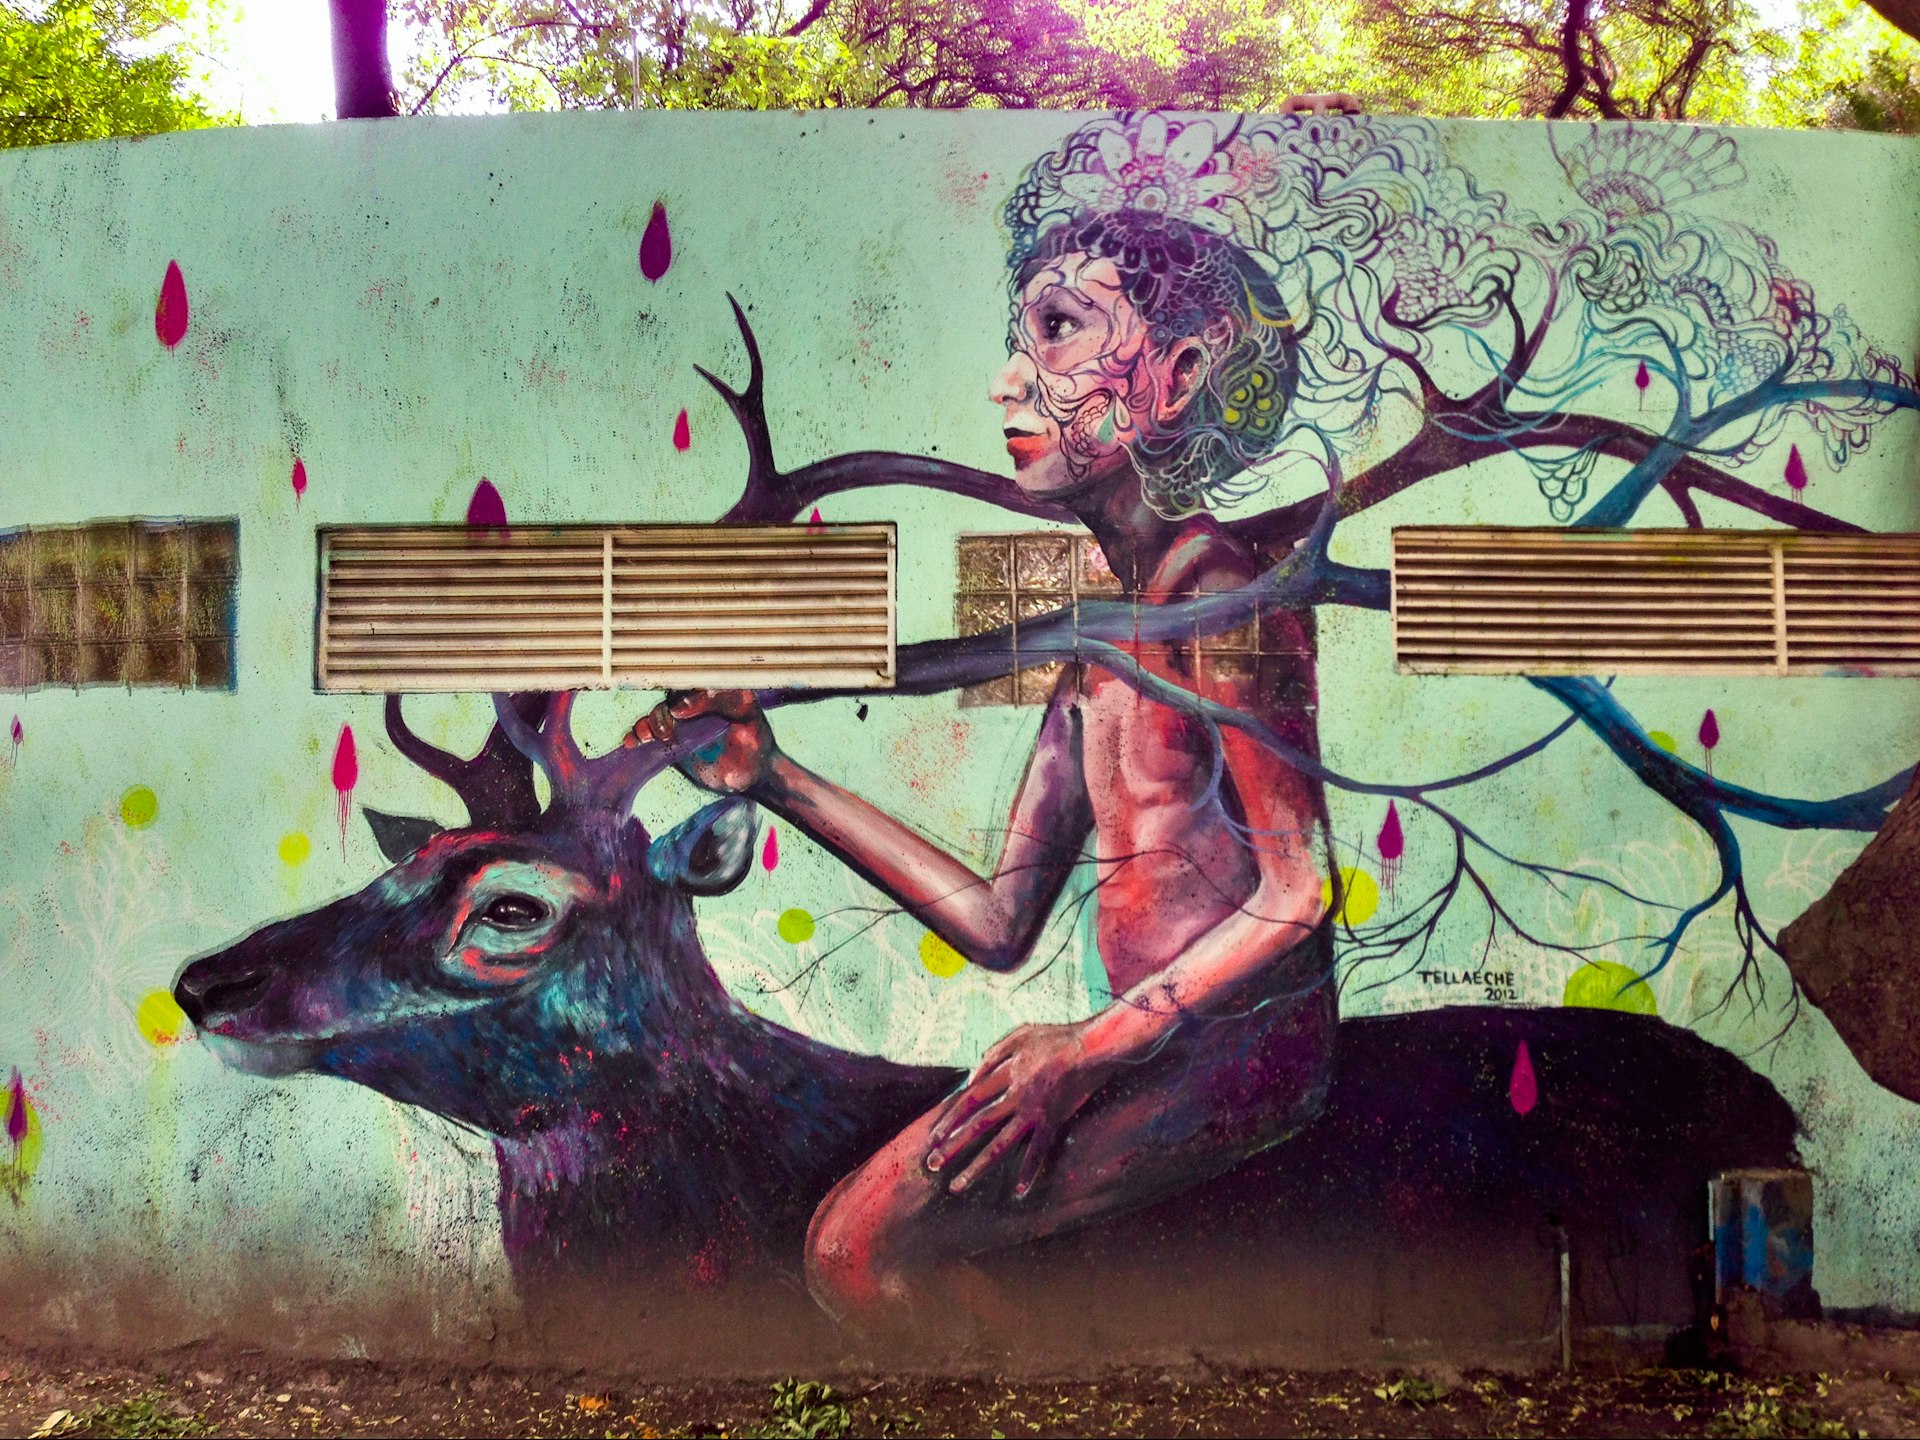 Colorful street art mural of a young person riding an elk painted on a large wall in the neighborhood of Condesa, Mexico City